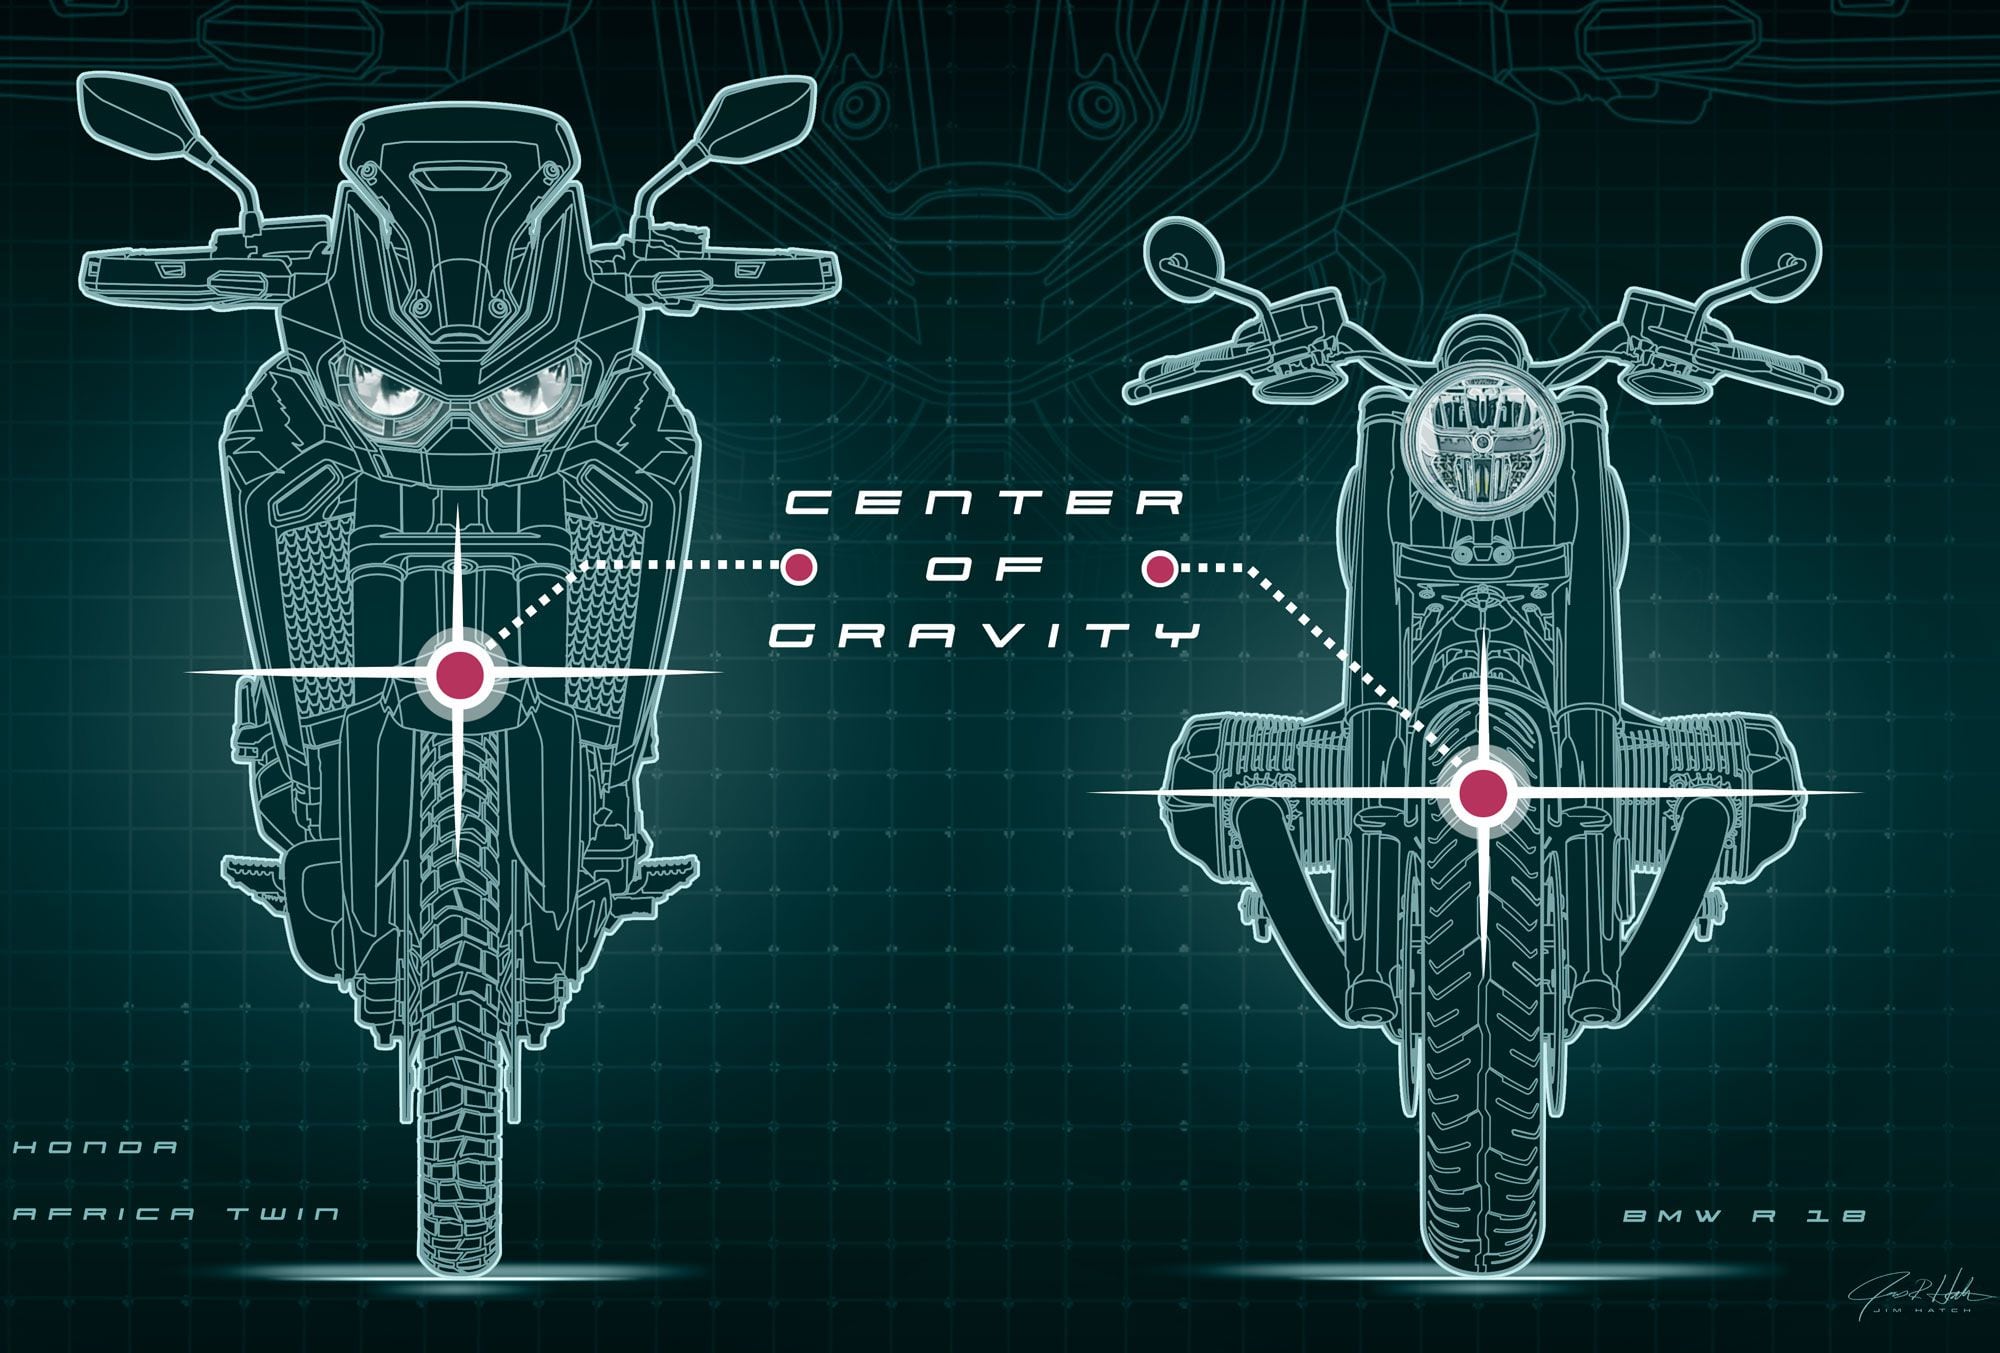 A Honda Africa Twin ADV bike’s center of mass is higher than that of BMW’s R 18 cruiser. The Africa Twin’s major masses are higher to achieve extra ground clearance, but the BMW’s C-of-M is lower because 1) off-road ground clearance is unnecessary, and 2) its “flat” engine’s cylinders mount lower than those of Honda’s parallel twin.